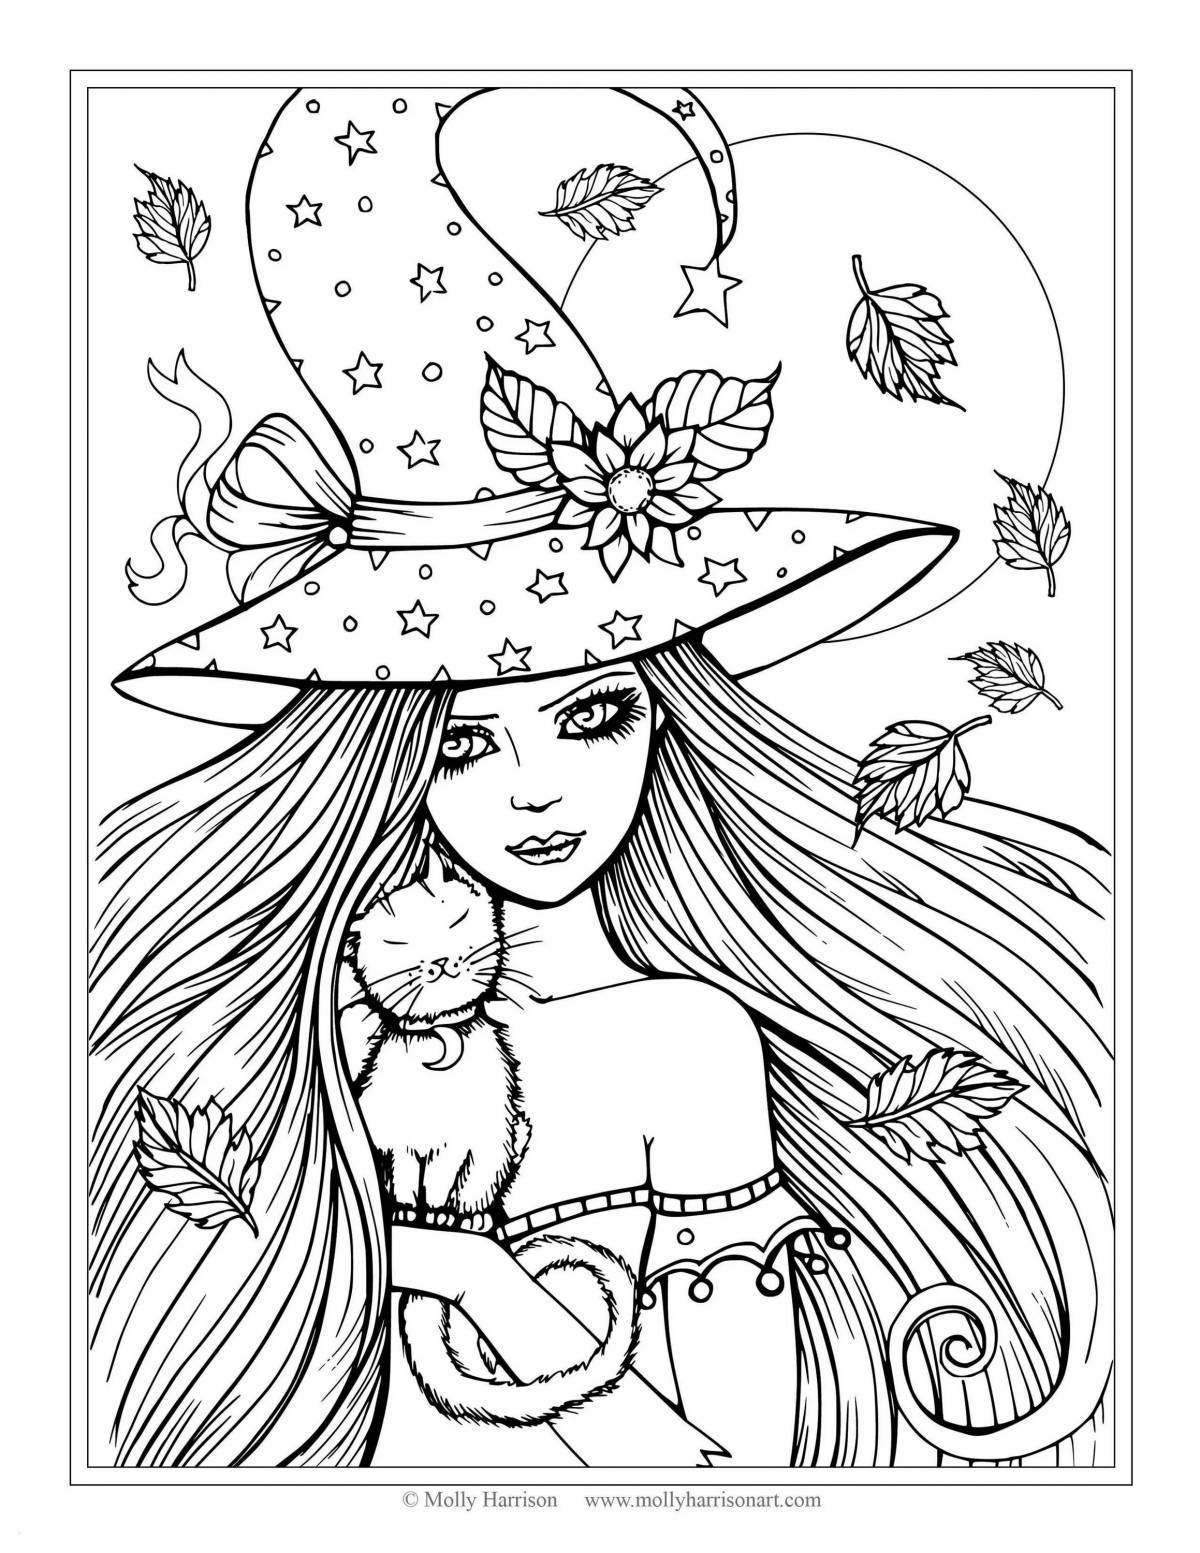 A wonderful coloring book for girls 15 years old